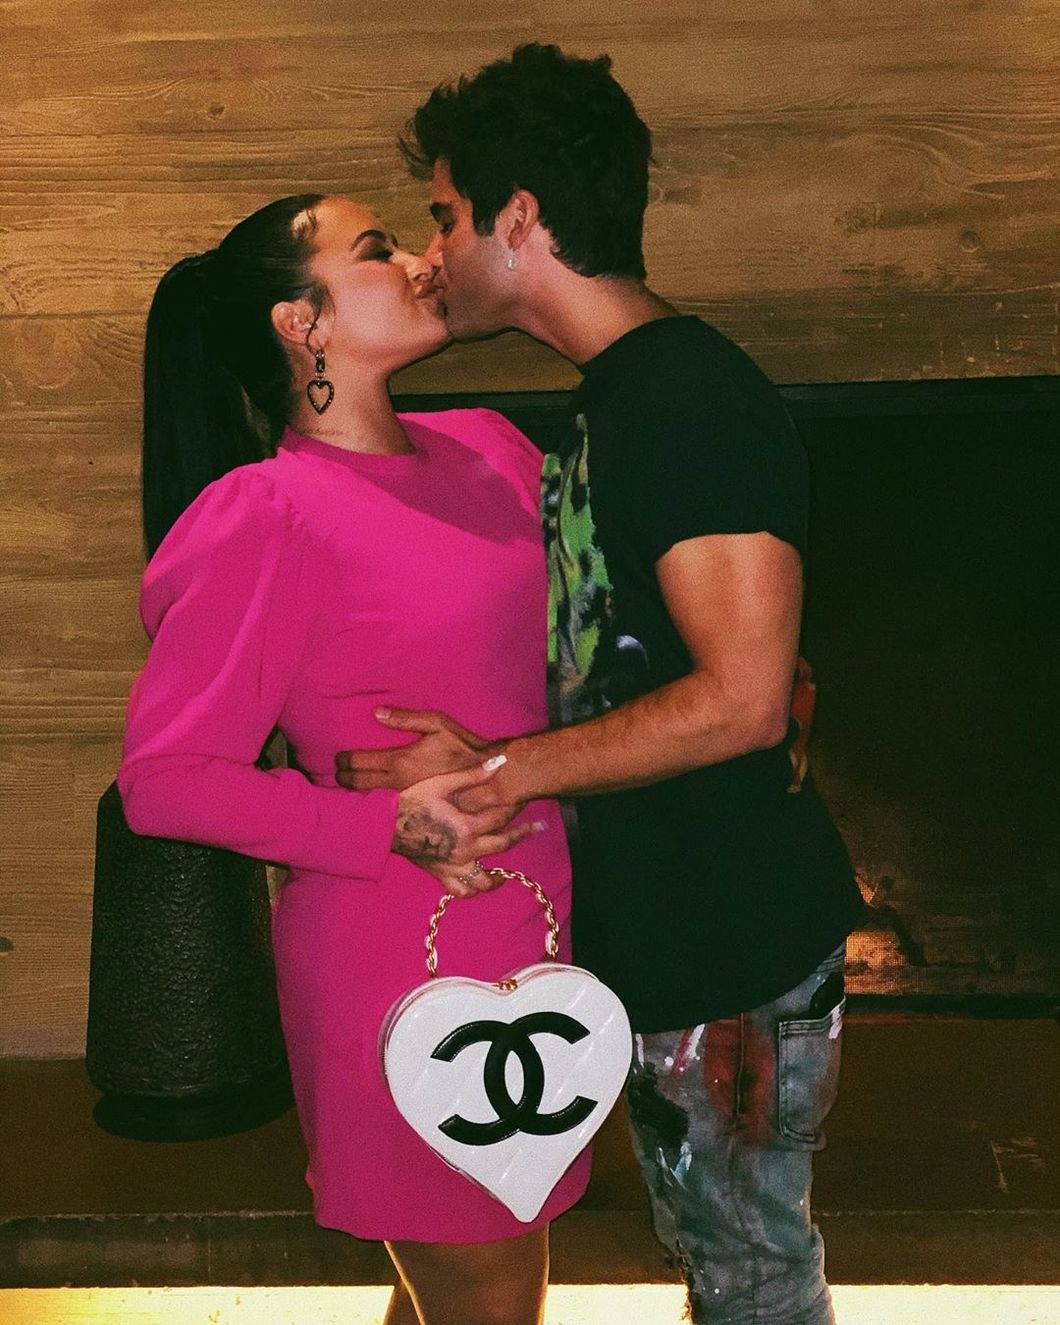 Demi Lovato and Max Ehrich kissing